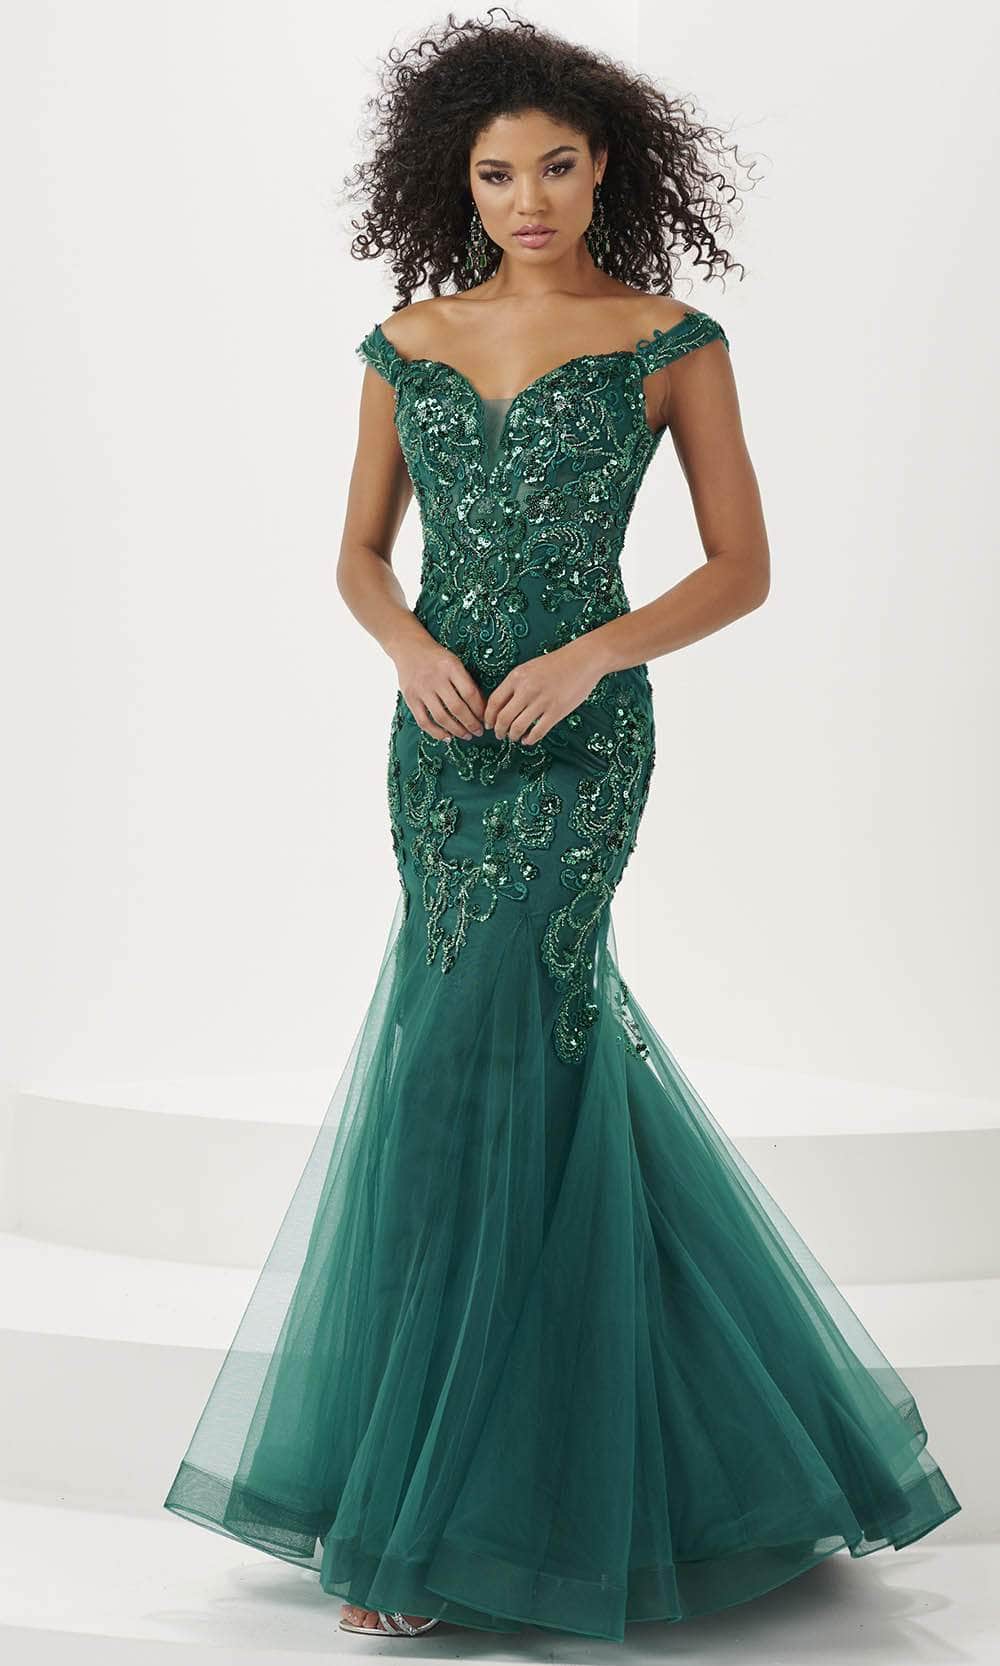 Panoply 14185 - Sequin Tulle Evening Gown Evening Gown 0 / Hunter Green